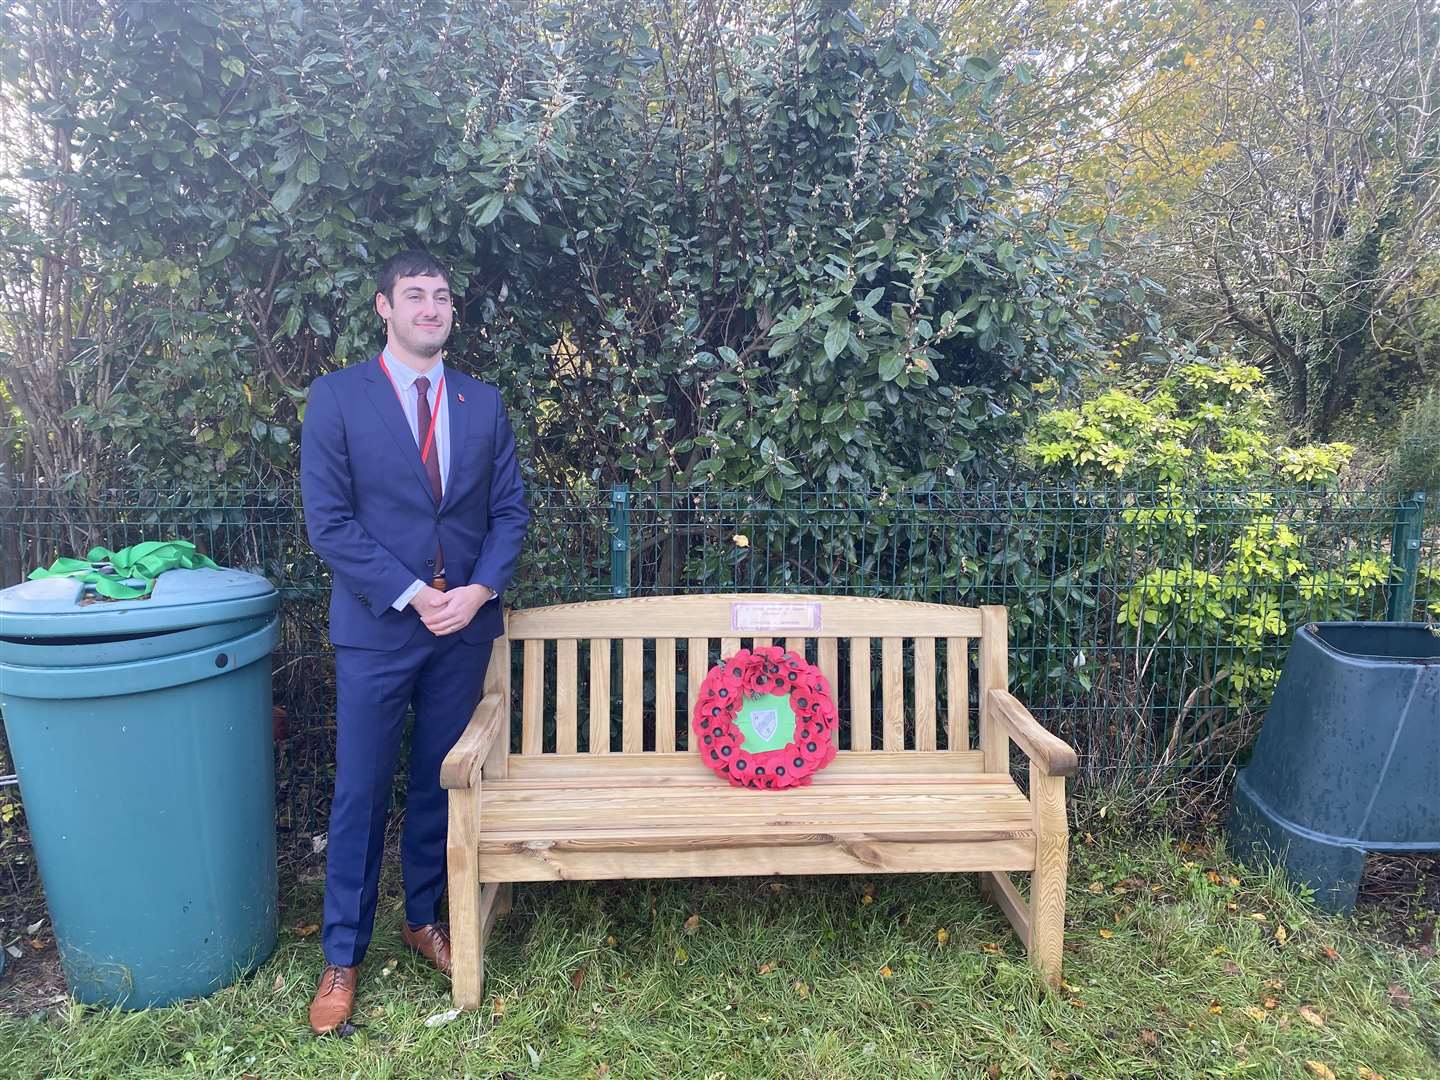 Tony Flynn standing next to the Jubilee bench